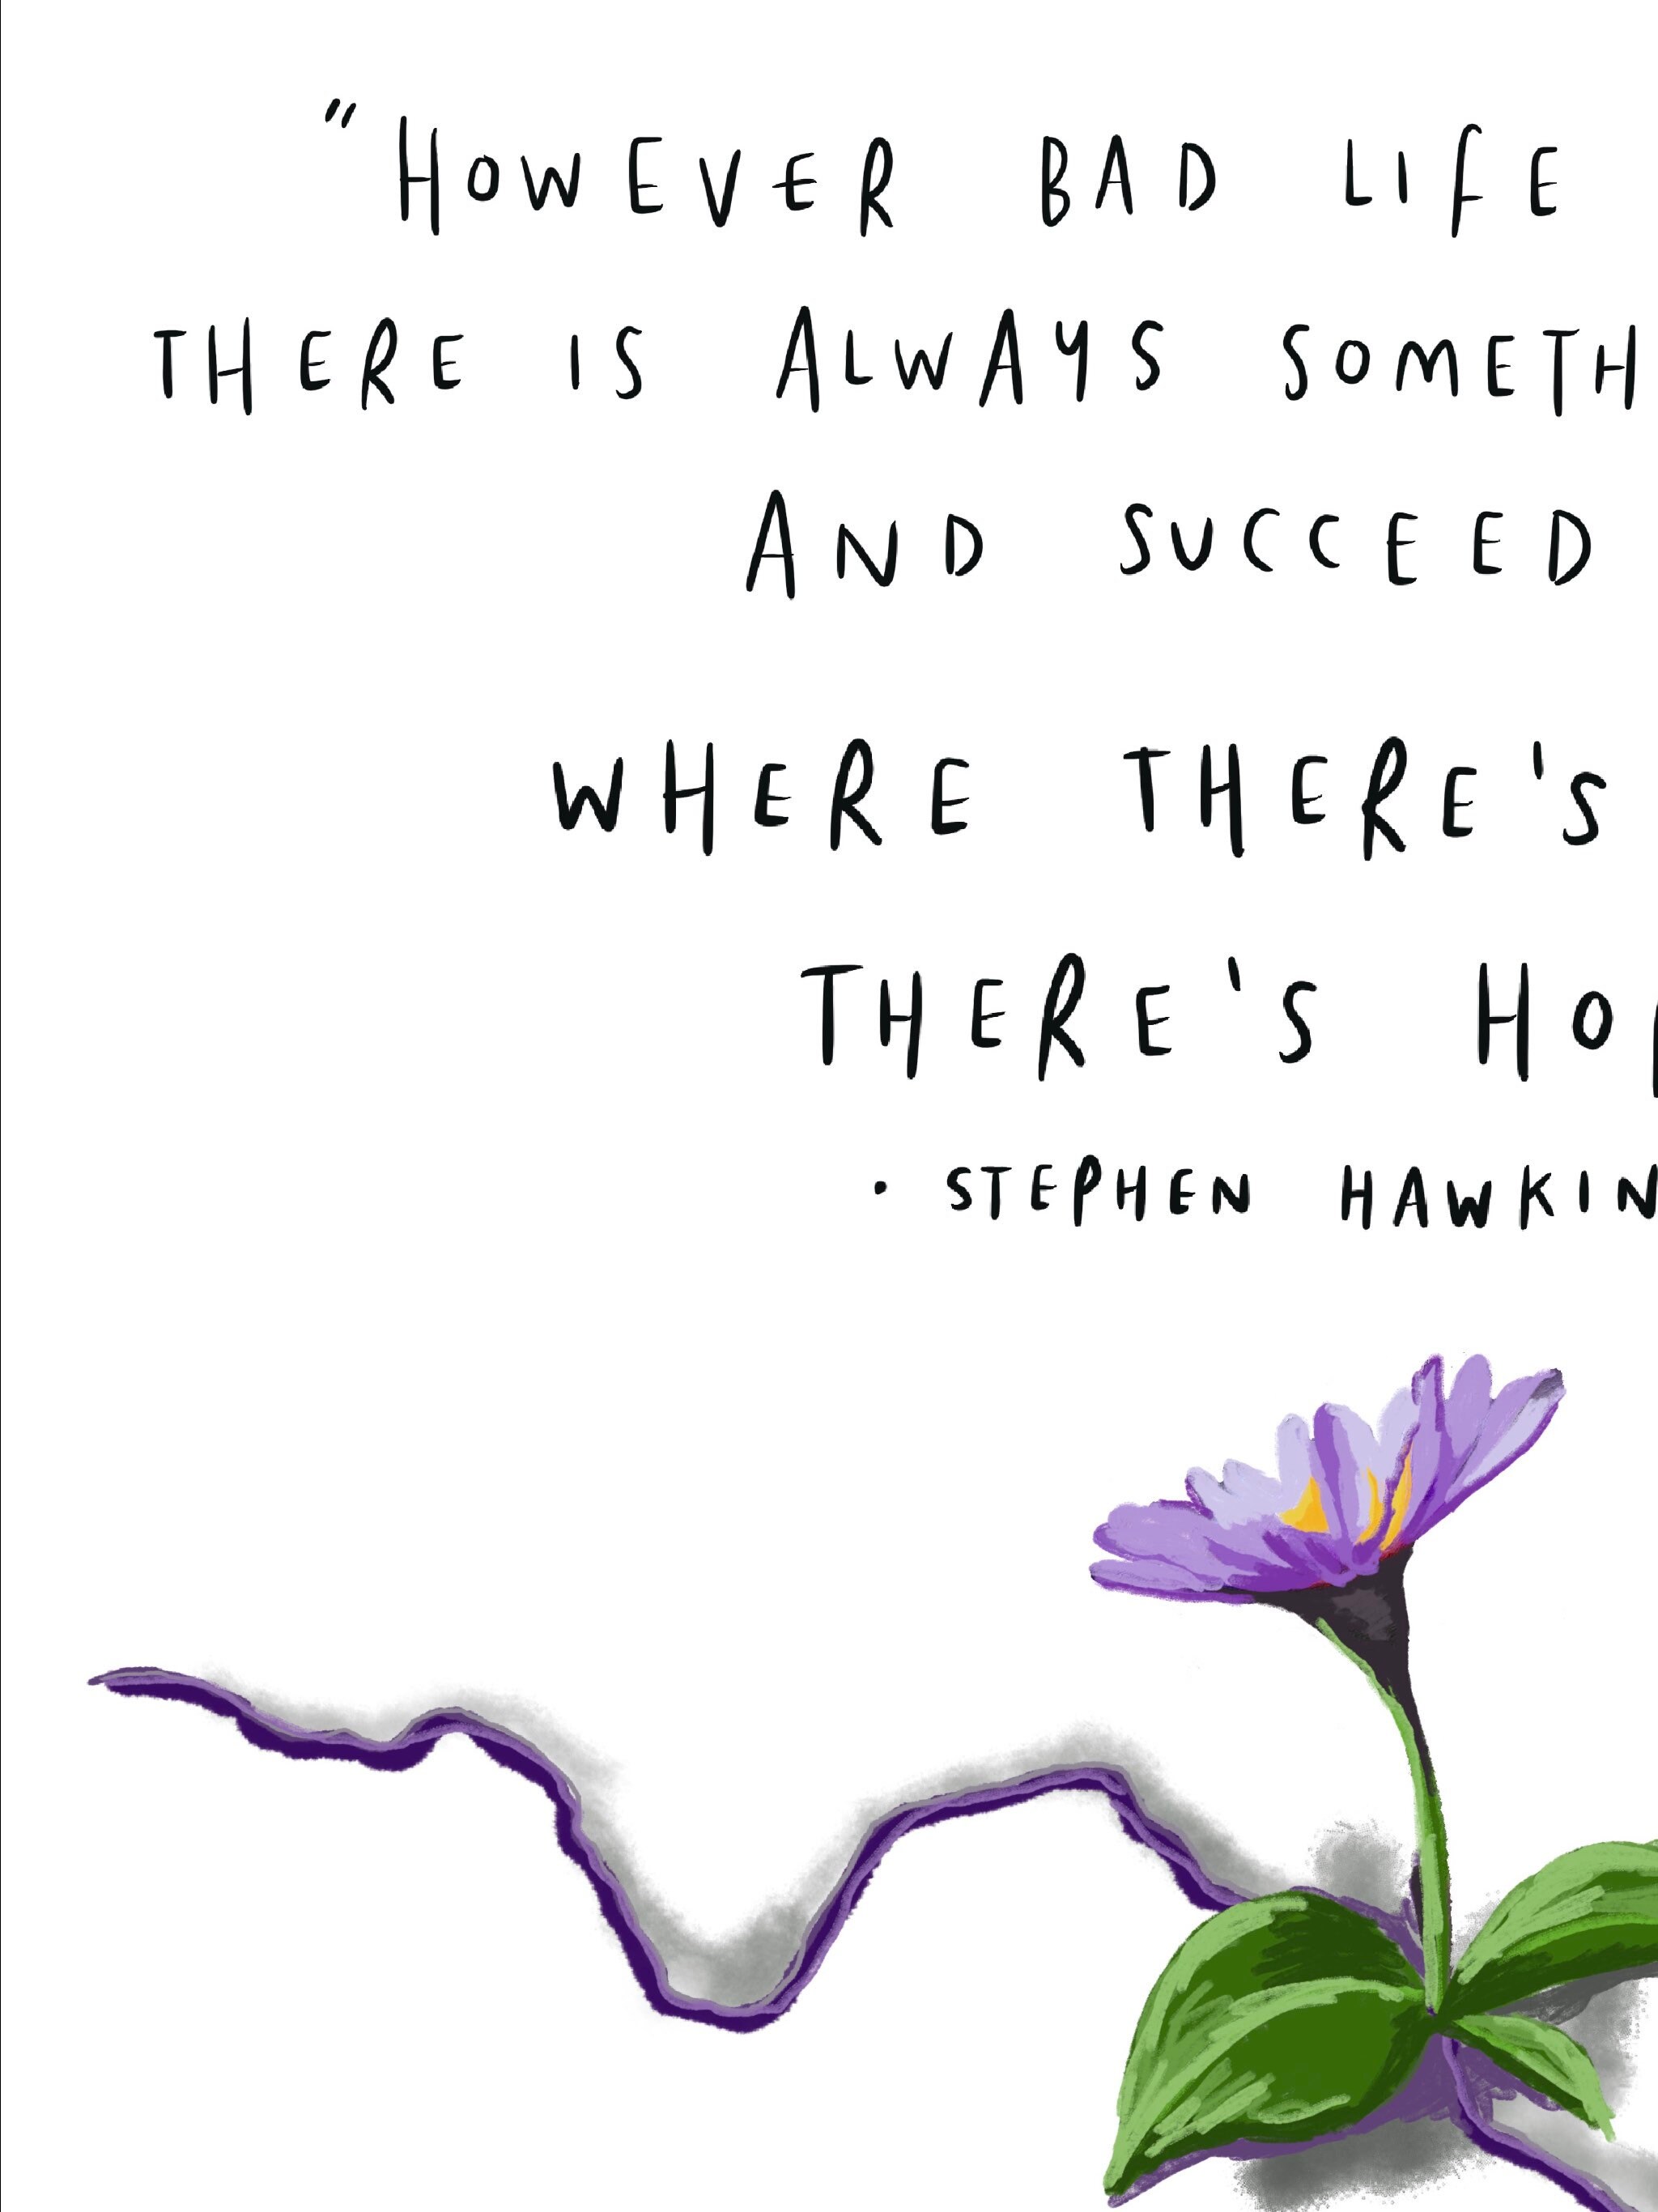 Where Theres Life Theres Hope By Stephen Hawking Quote Art Etsy